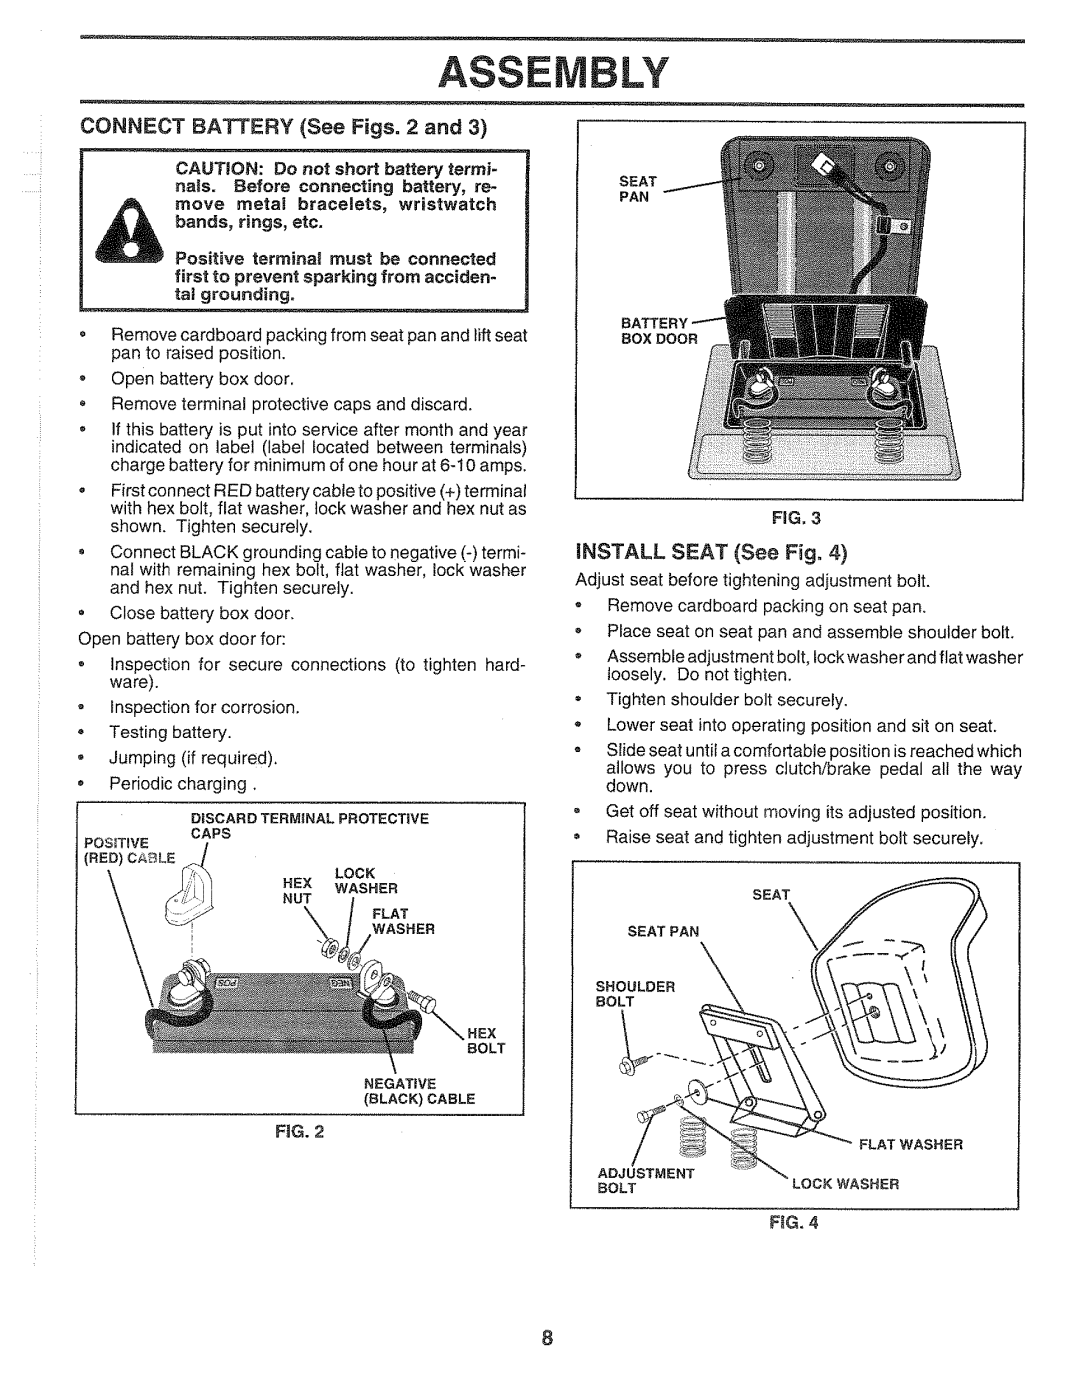 Sears 917.2565 CONNECT BATTERY See Figs, 2 and, iNSTALL SEAT See Fig, CAUTION: Do not short battery terni, rials, Before 